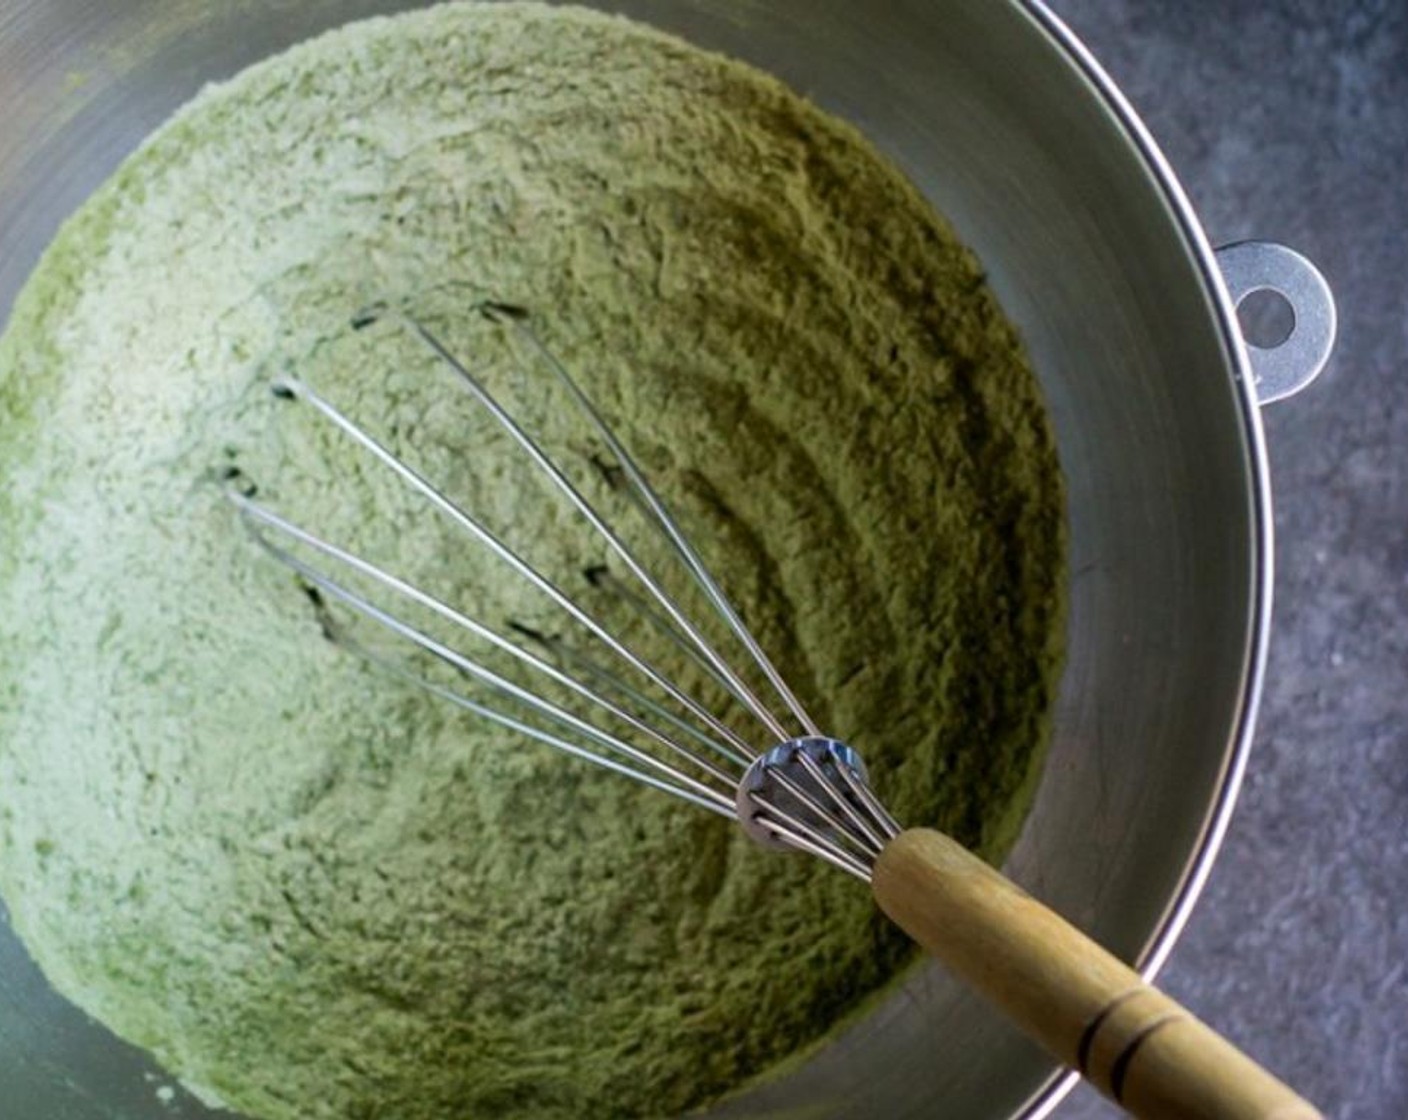 step 3 Make the dough. Whisk together the Bread Flour (2 cups), Granulated Sugar (1/2 cup), Matcha Powder (1 Tbsp), Instant Dry Yeast (1 1/4 tsp), Fine Salt (1 tsp), and Non-Fat Dry Milk Powder (1 tsp) in the bowl of your stand mixer.